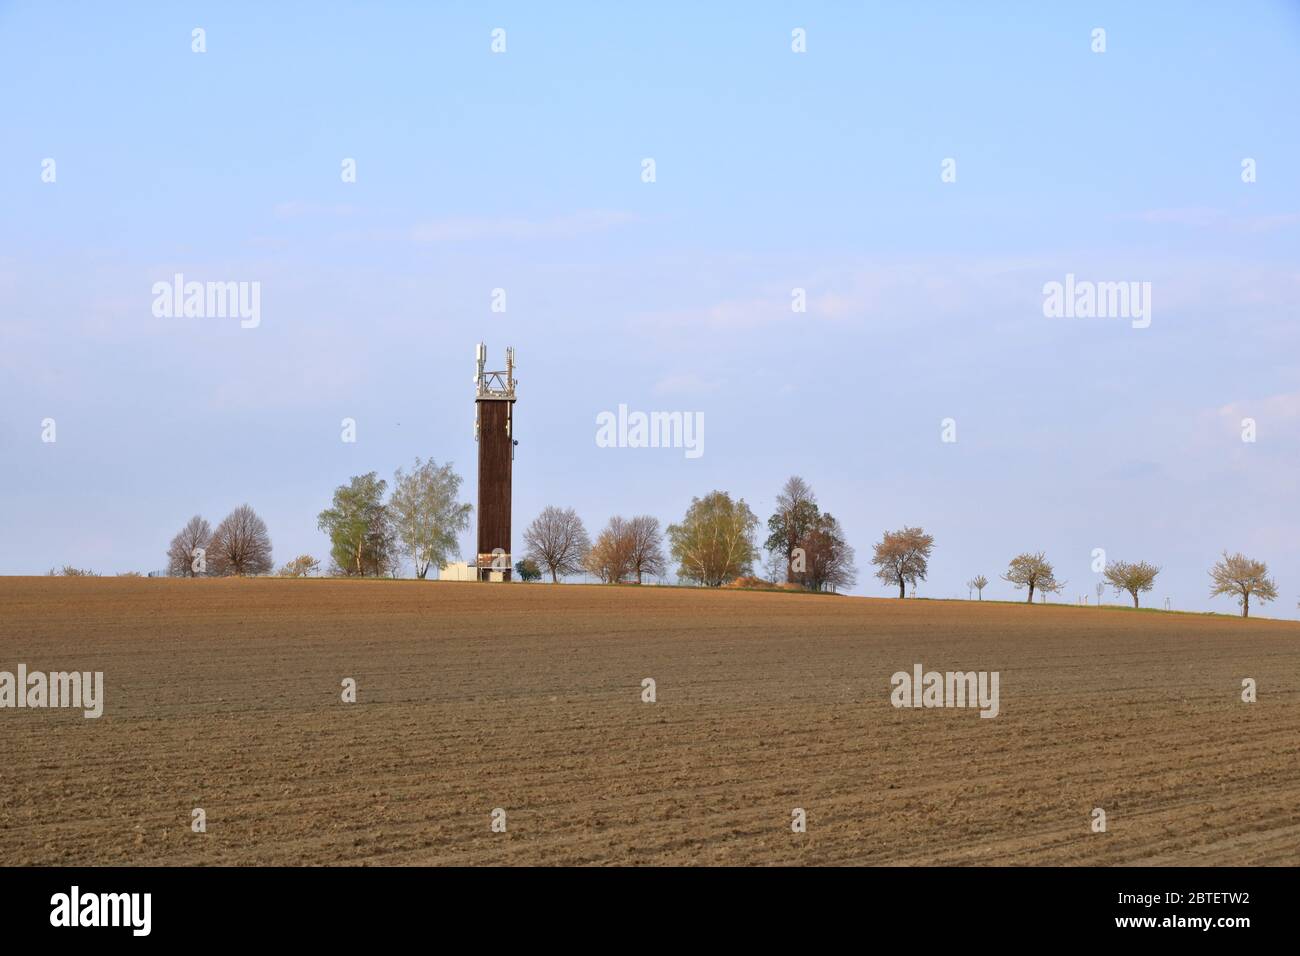 Wooden Telecommunication tower with transmitters. Cellular base station with transmitter antennas on telecommunication tower on against a blue sky wit Stock Photo